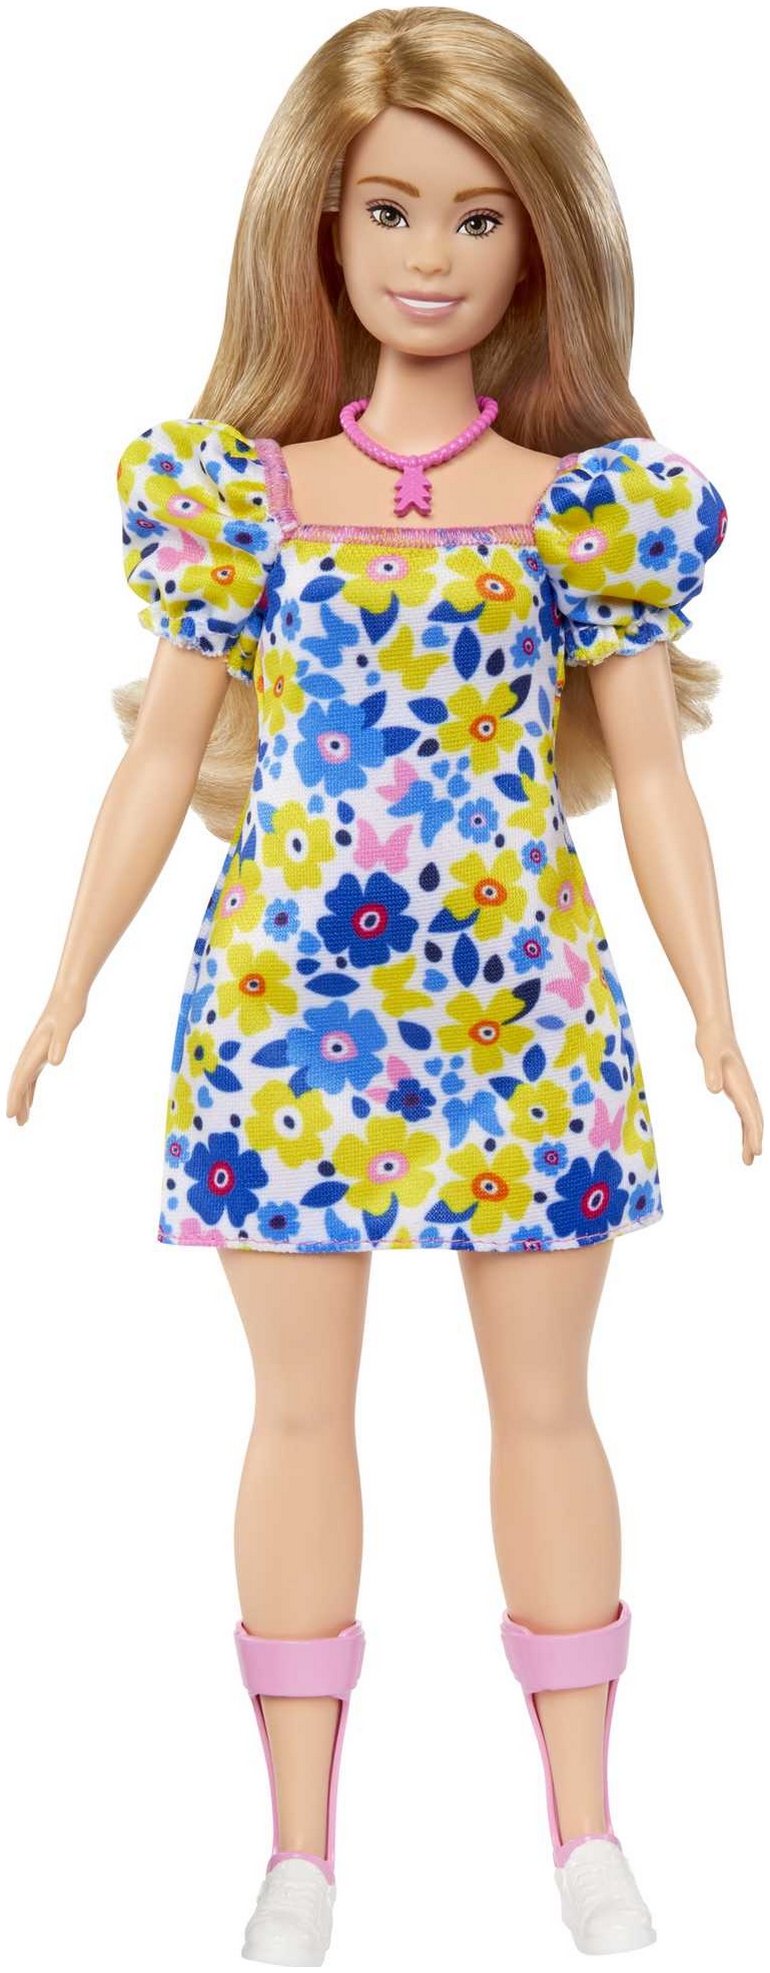 1673625508-youloveit-com-barbie-fashionistas-2023-down-sindrome-doll4